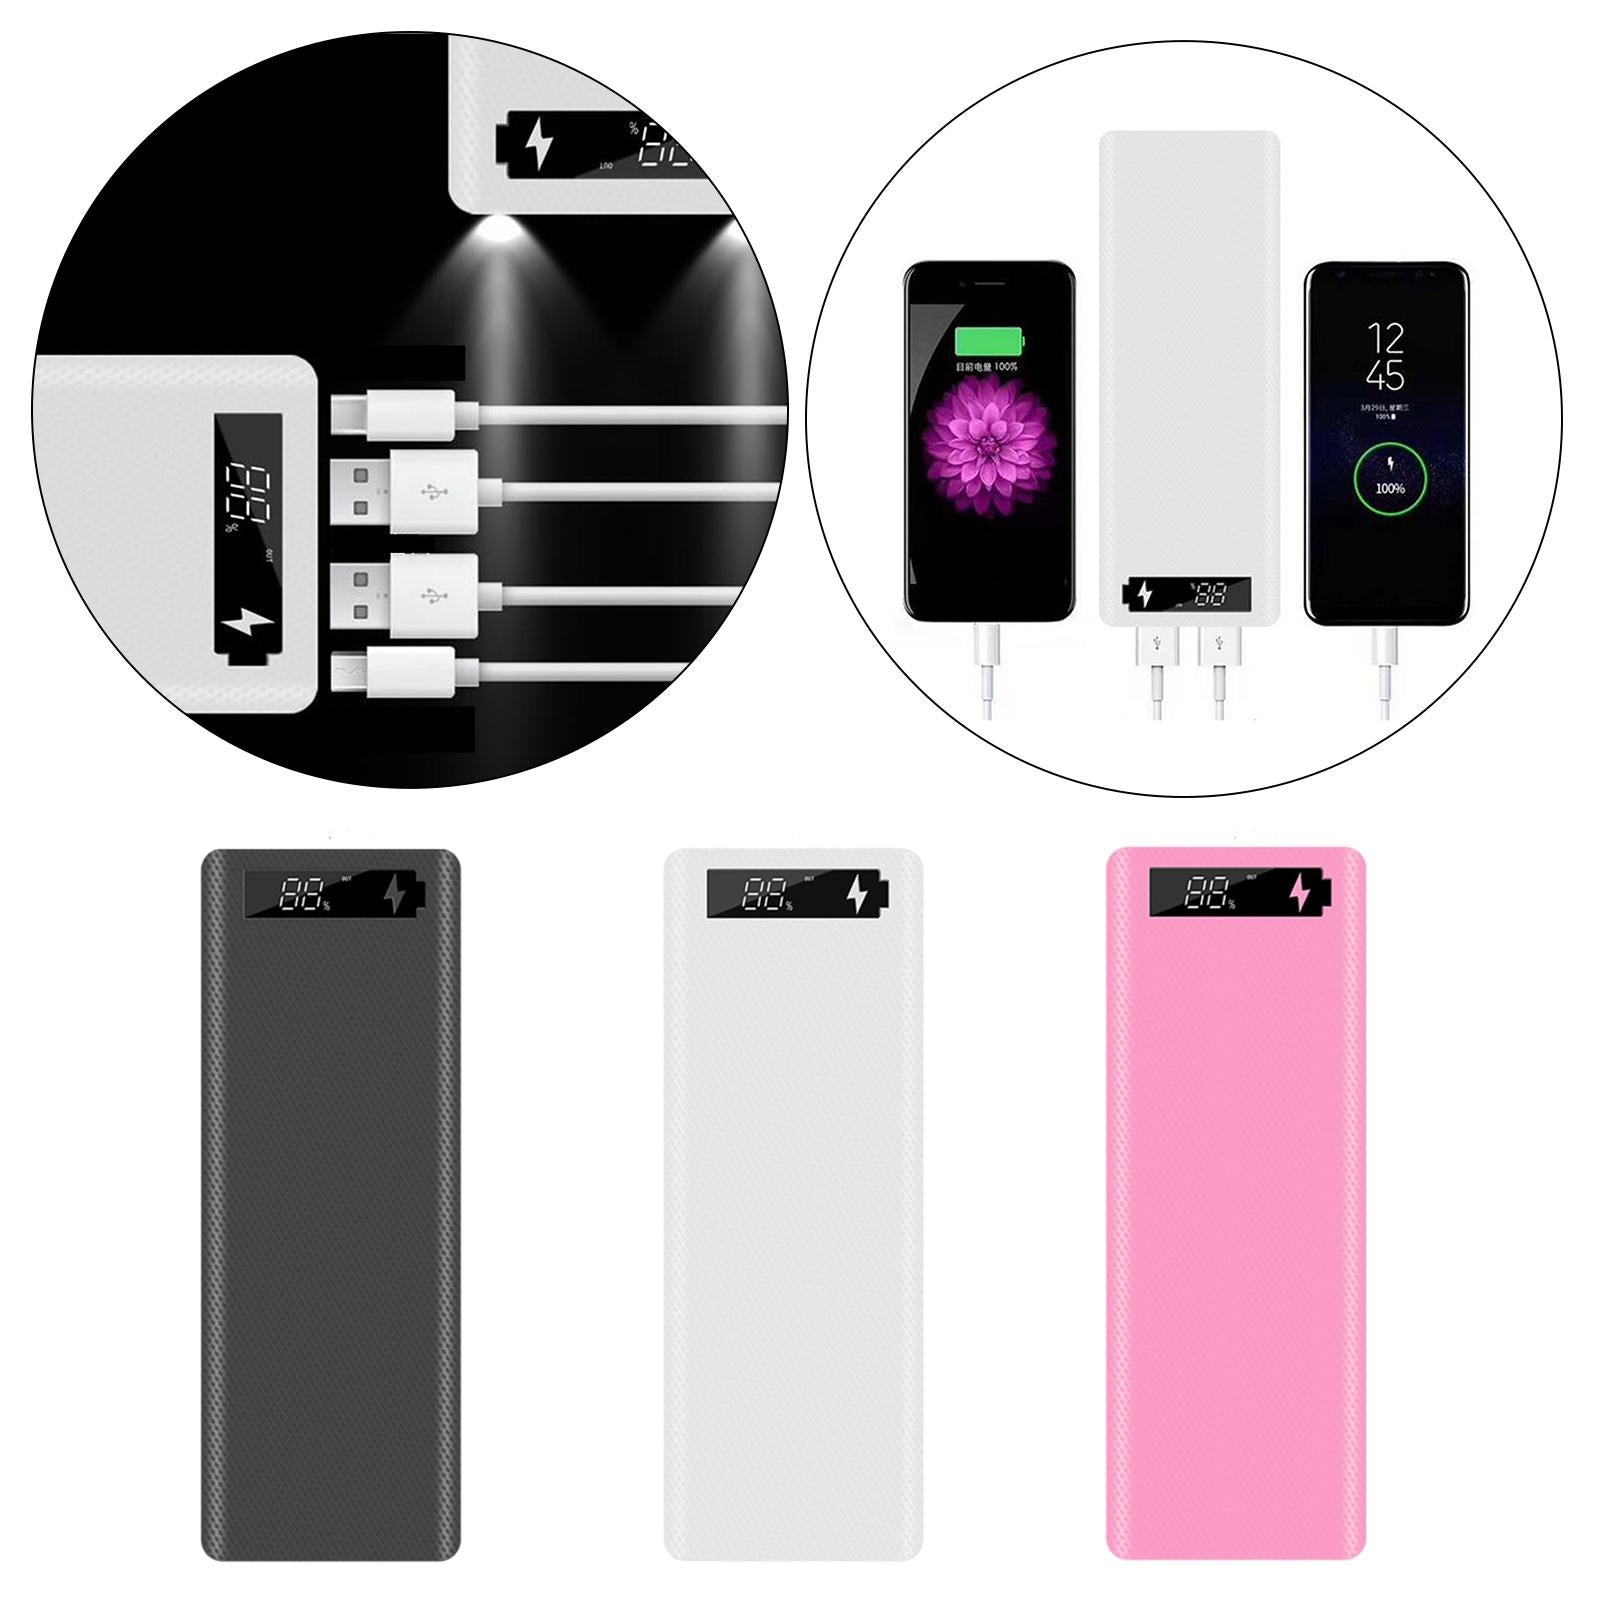 30000mAh 10x18650 Power Bank Dual USB for All USB Devices Black Quick Charge